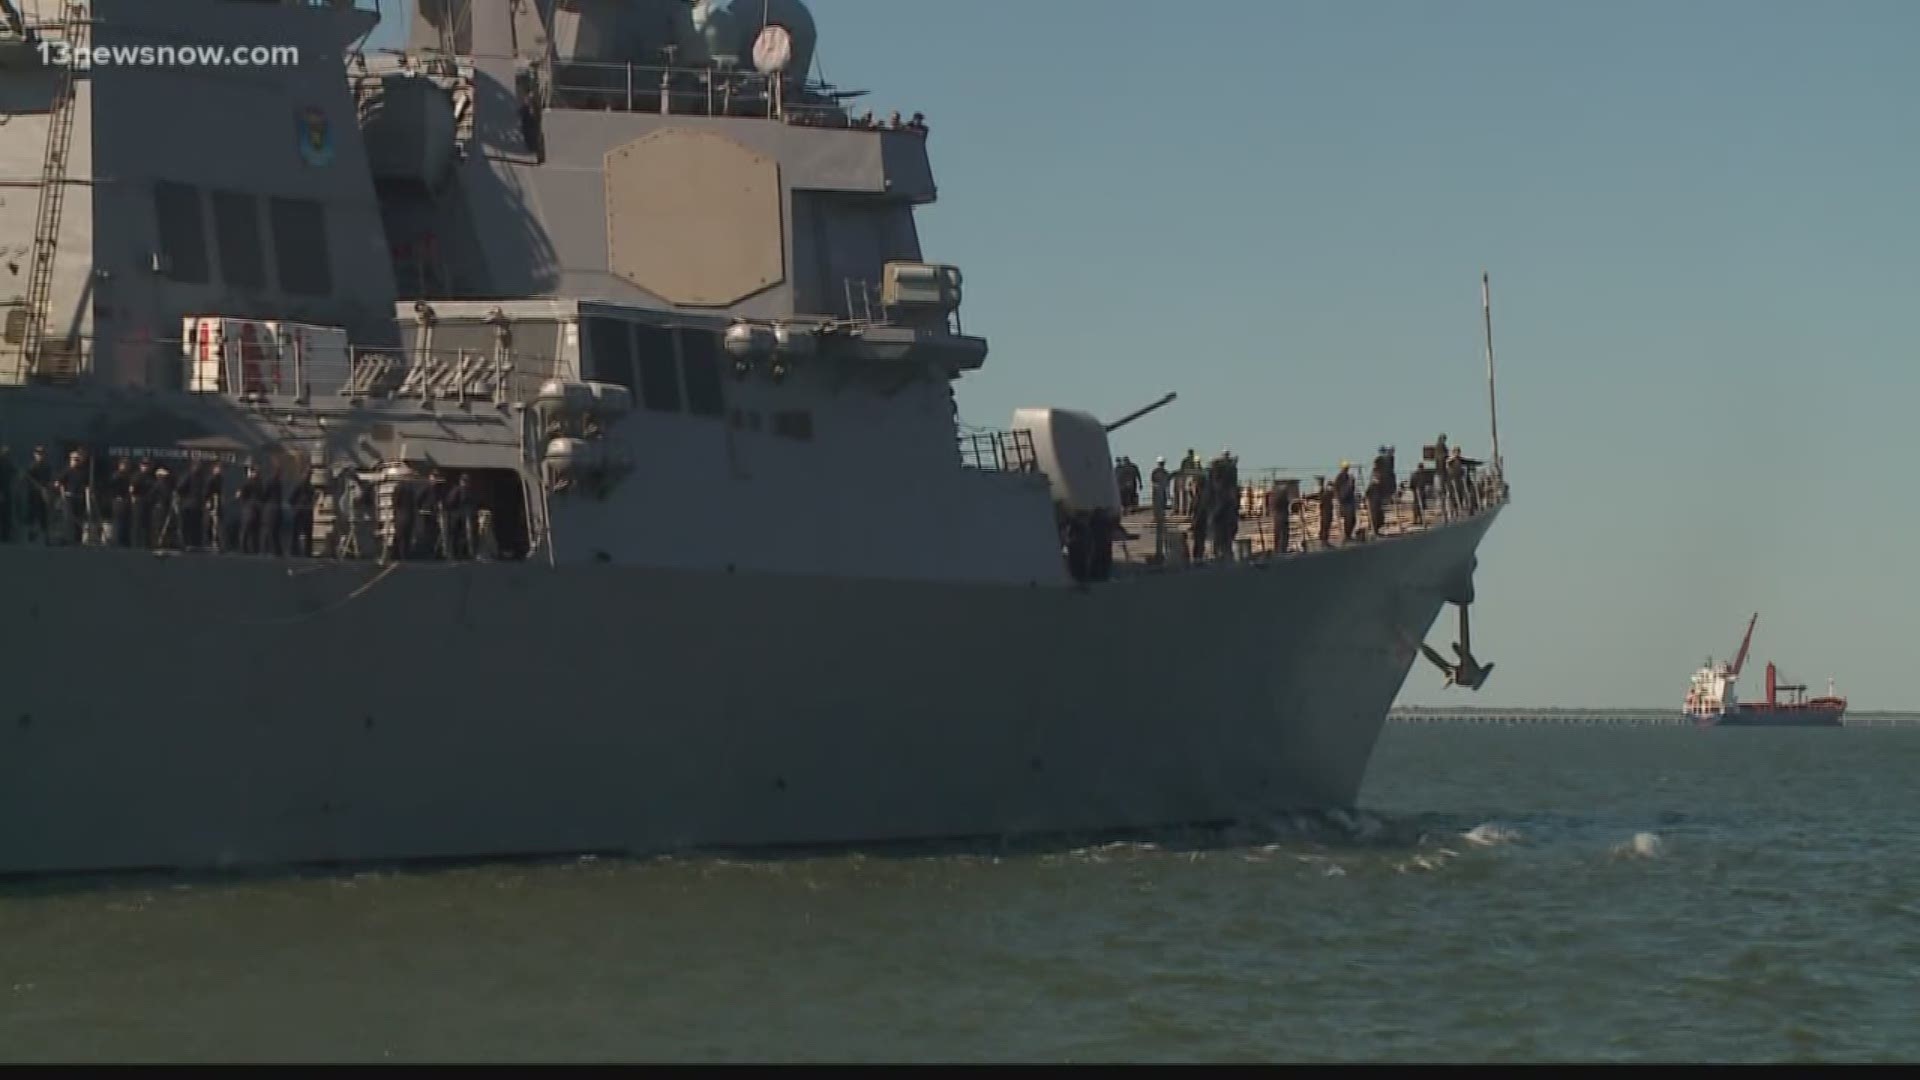 While officials say sailors need to get the most realistic training, the Navy will continue doing everything possible to protect marine life.